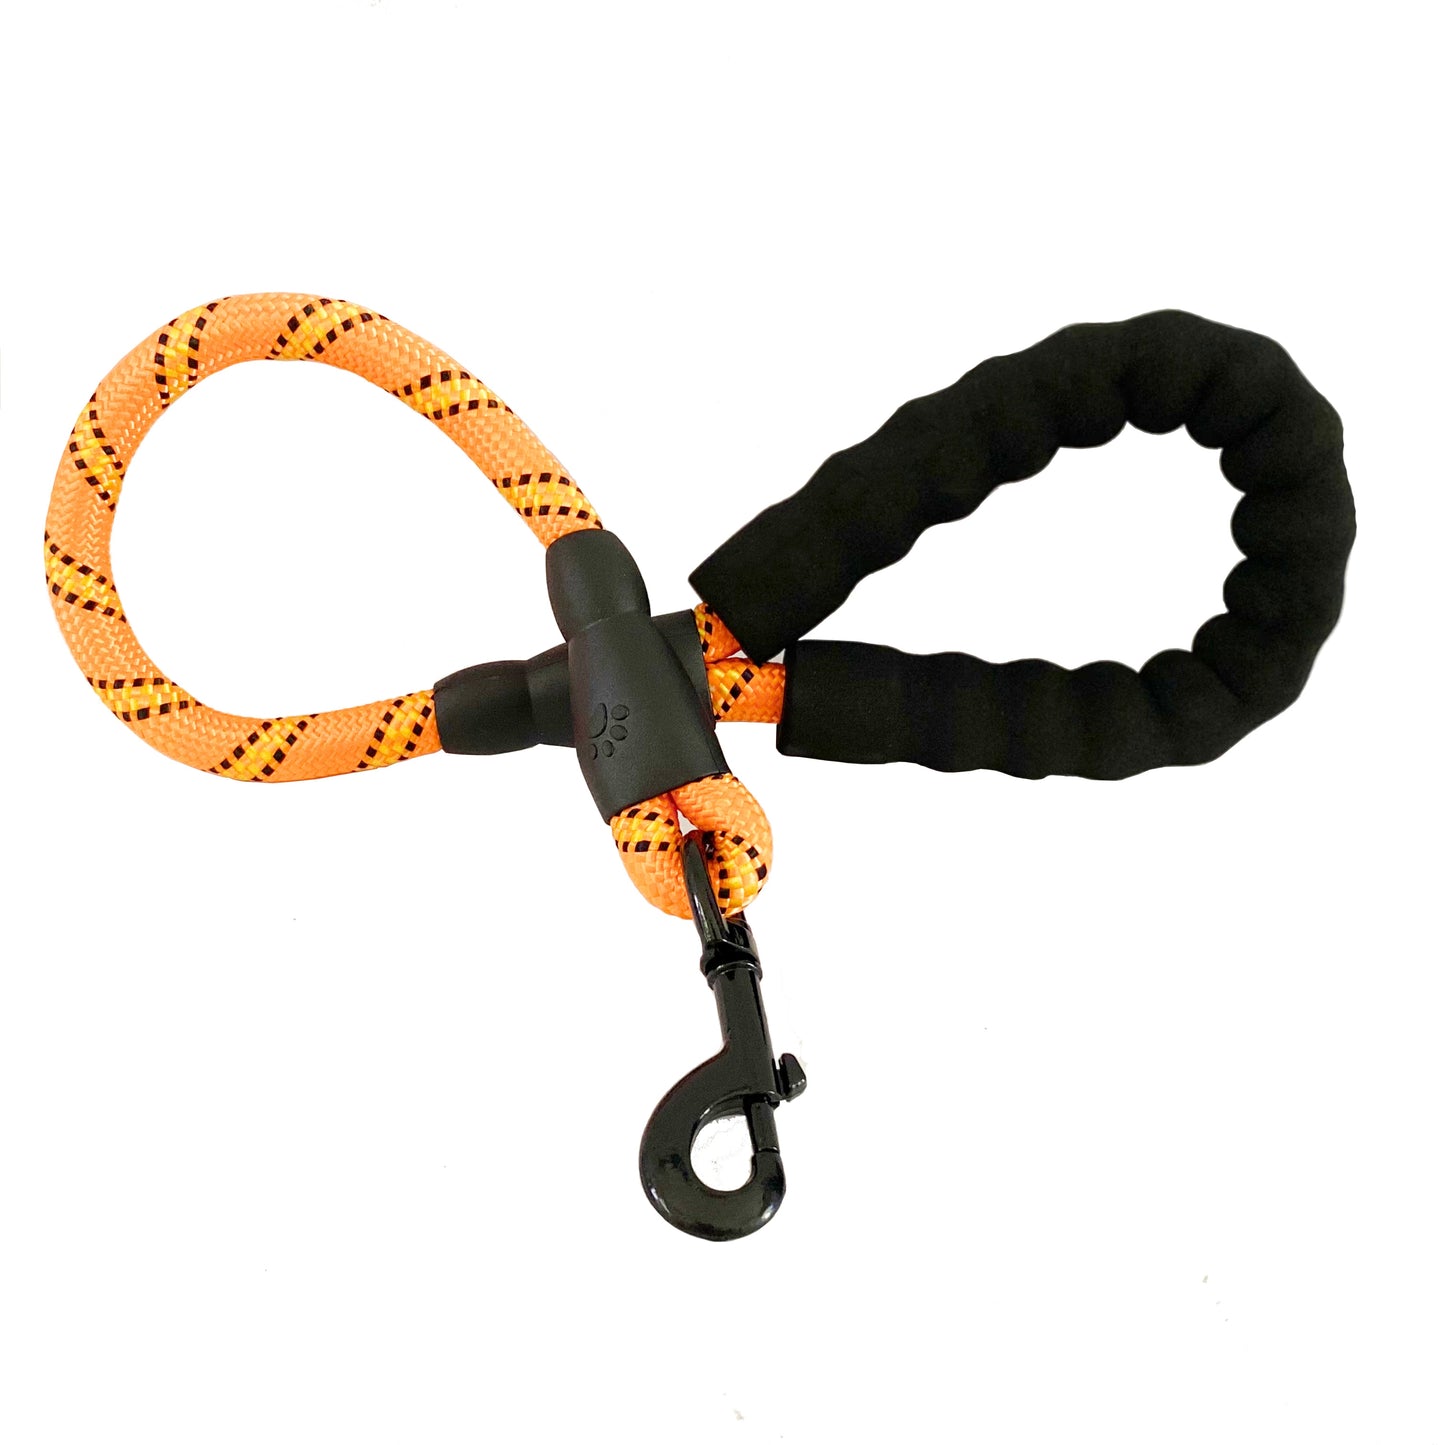 Short Dog Leash Rope 2FT, Strong Mountain Climbing Lead, Reflective Training Leashes with Carabiner for Large and Extra Large